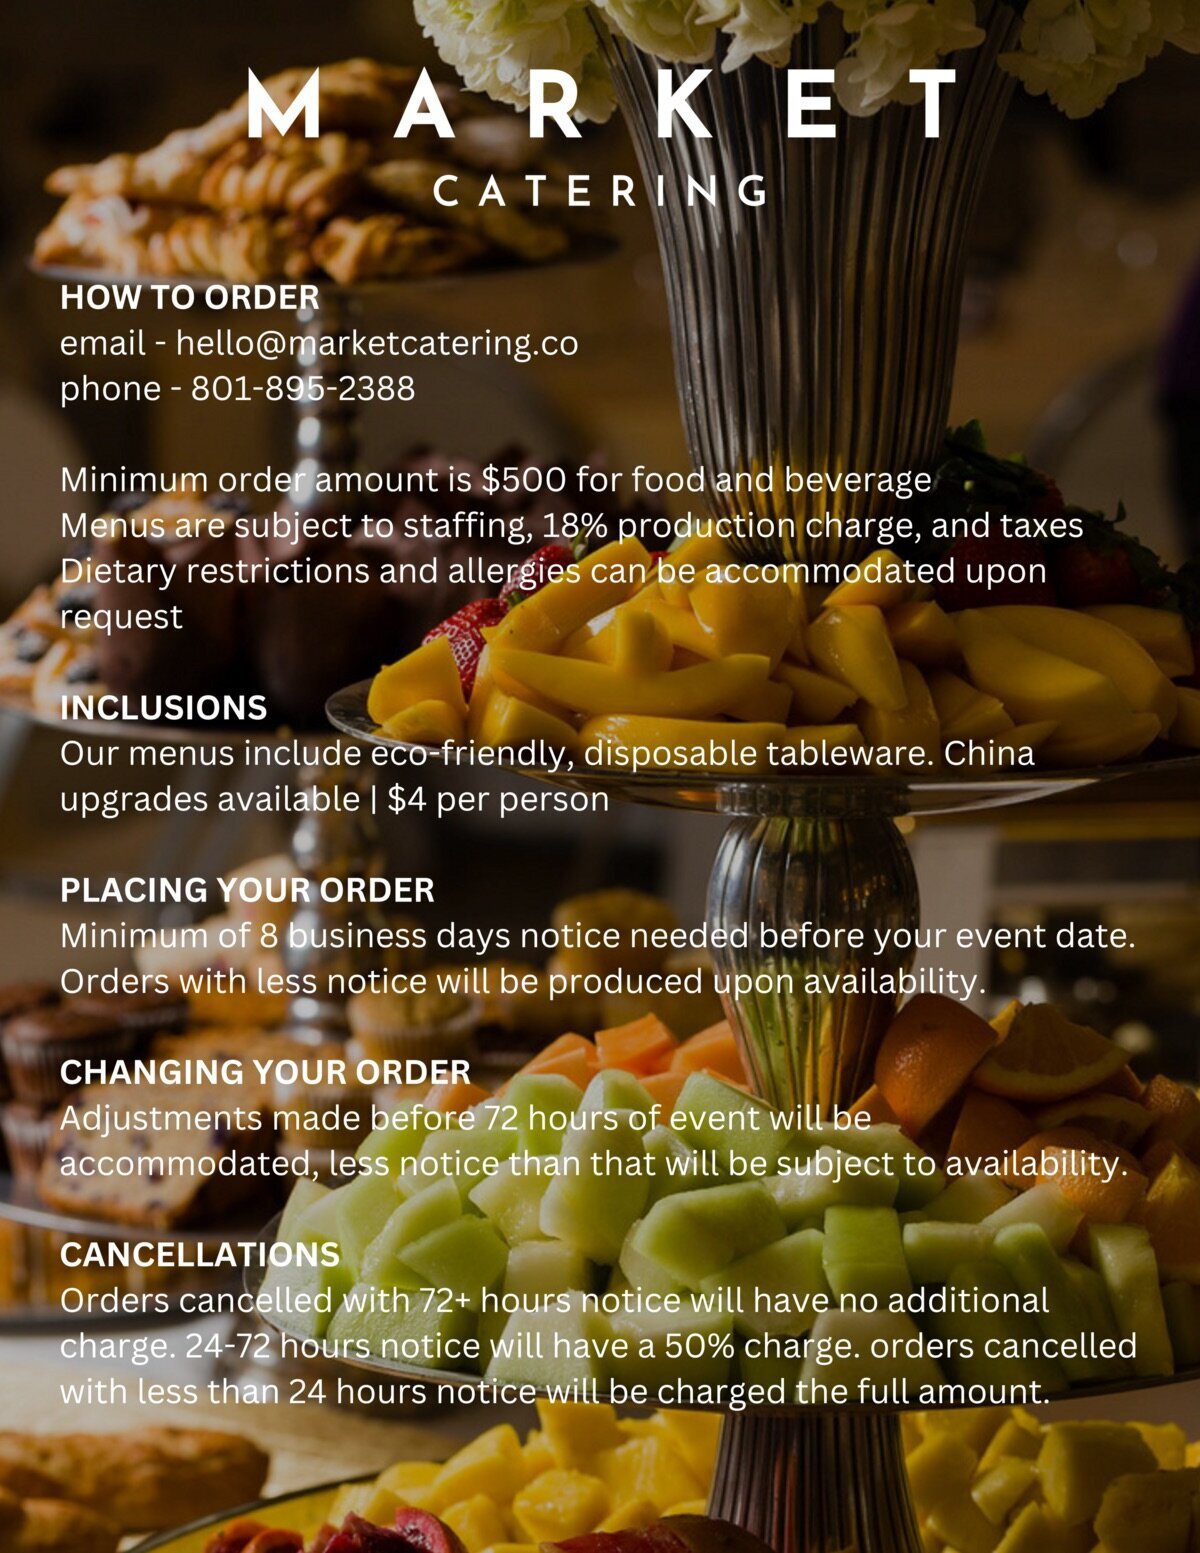 Market Catering